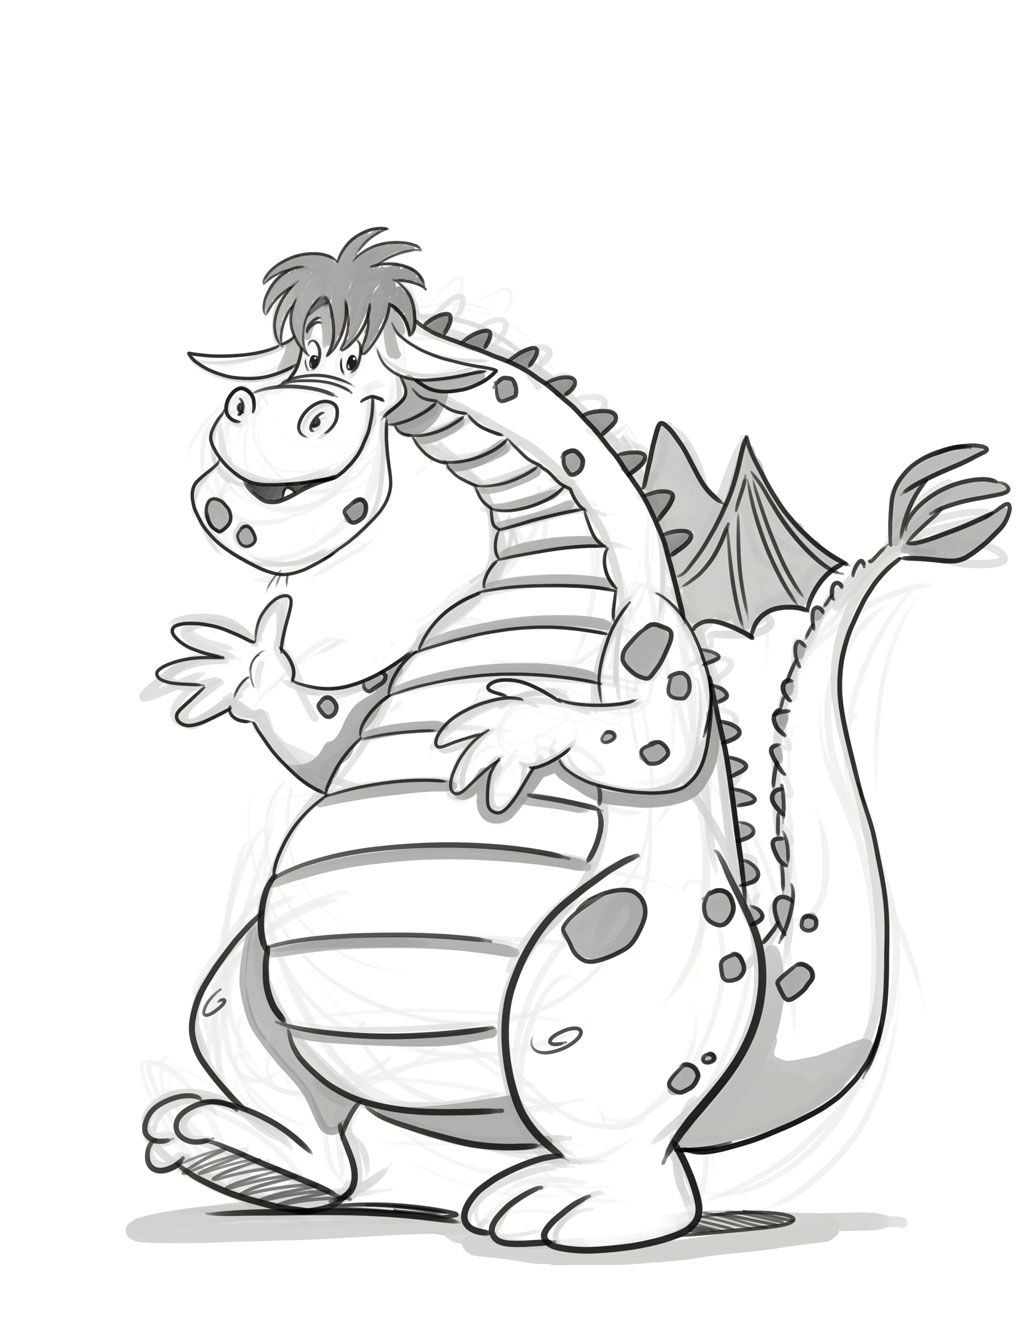 puff the magic dragon coloring pages